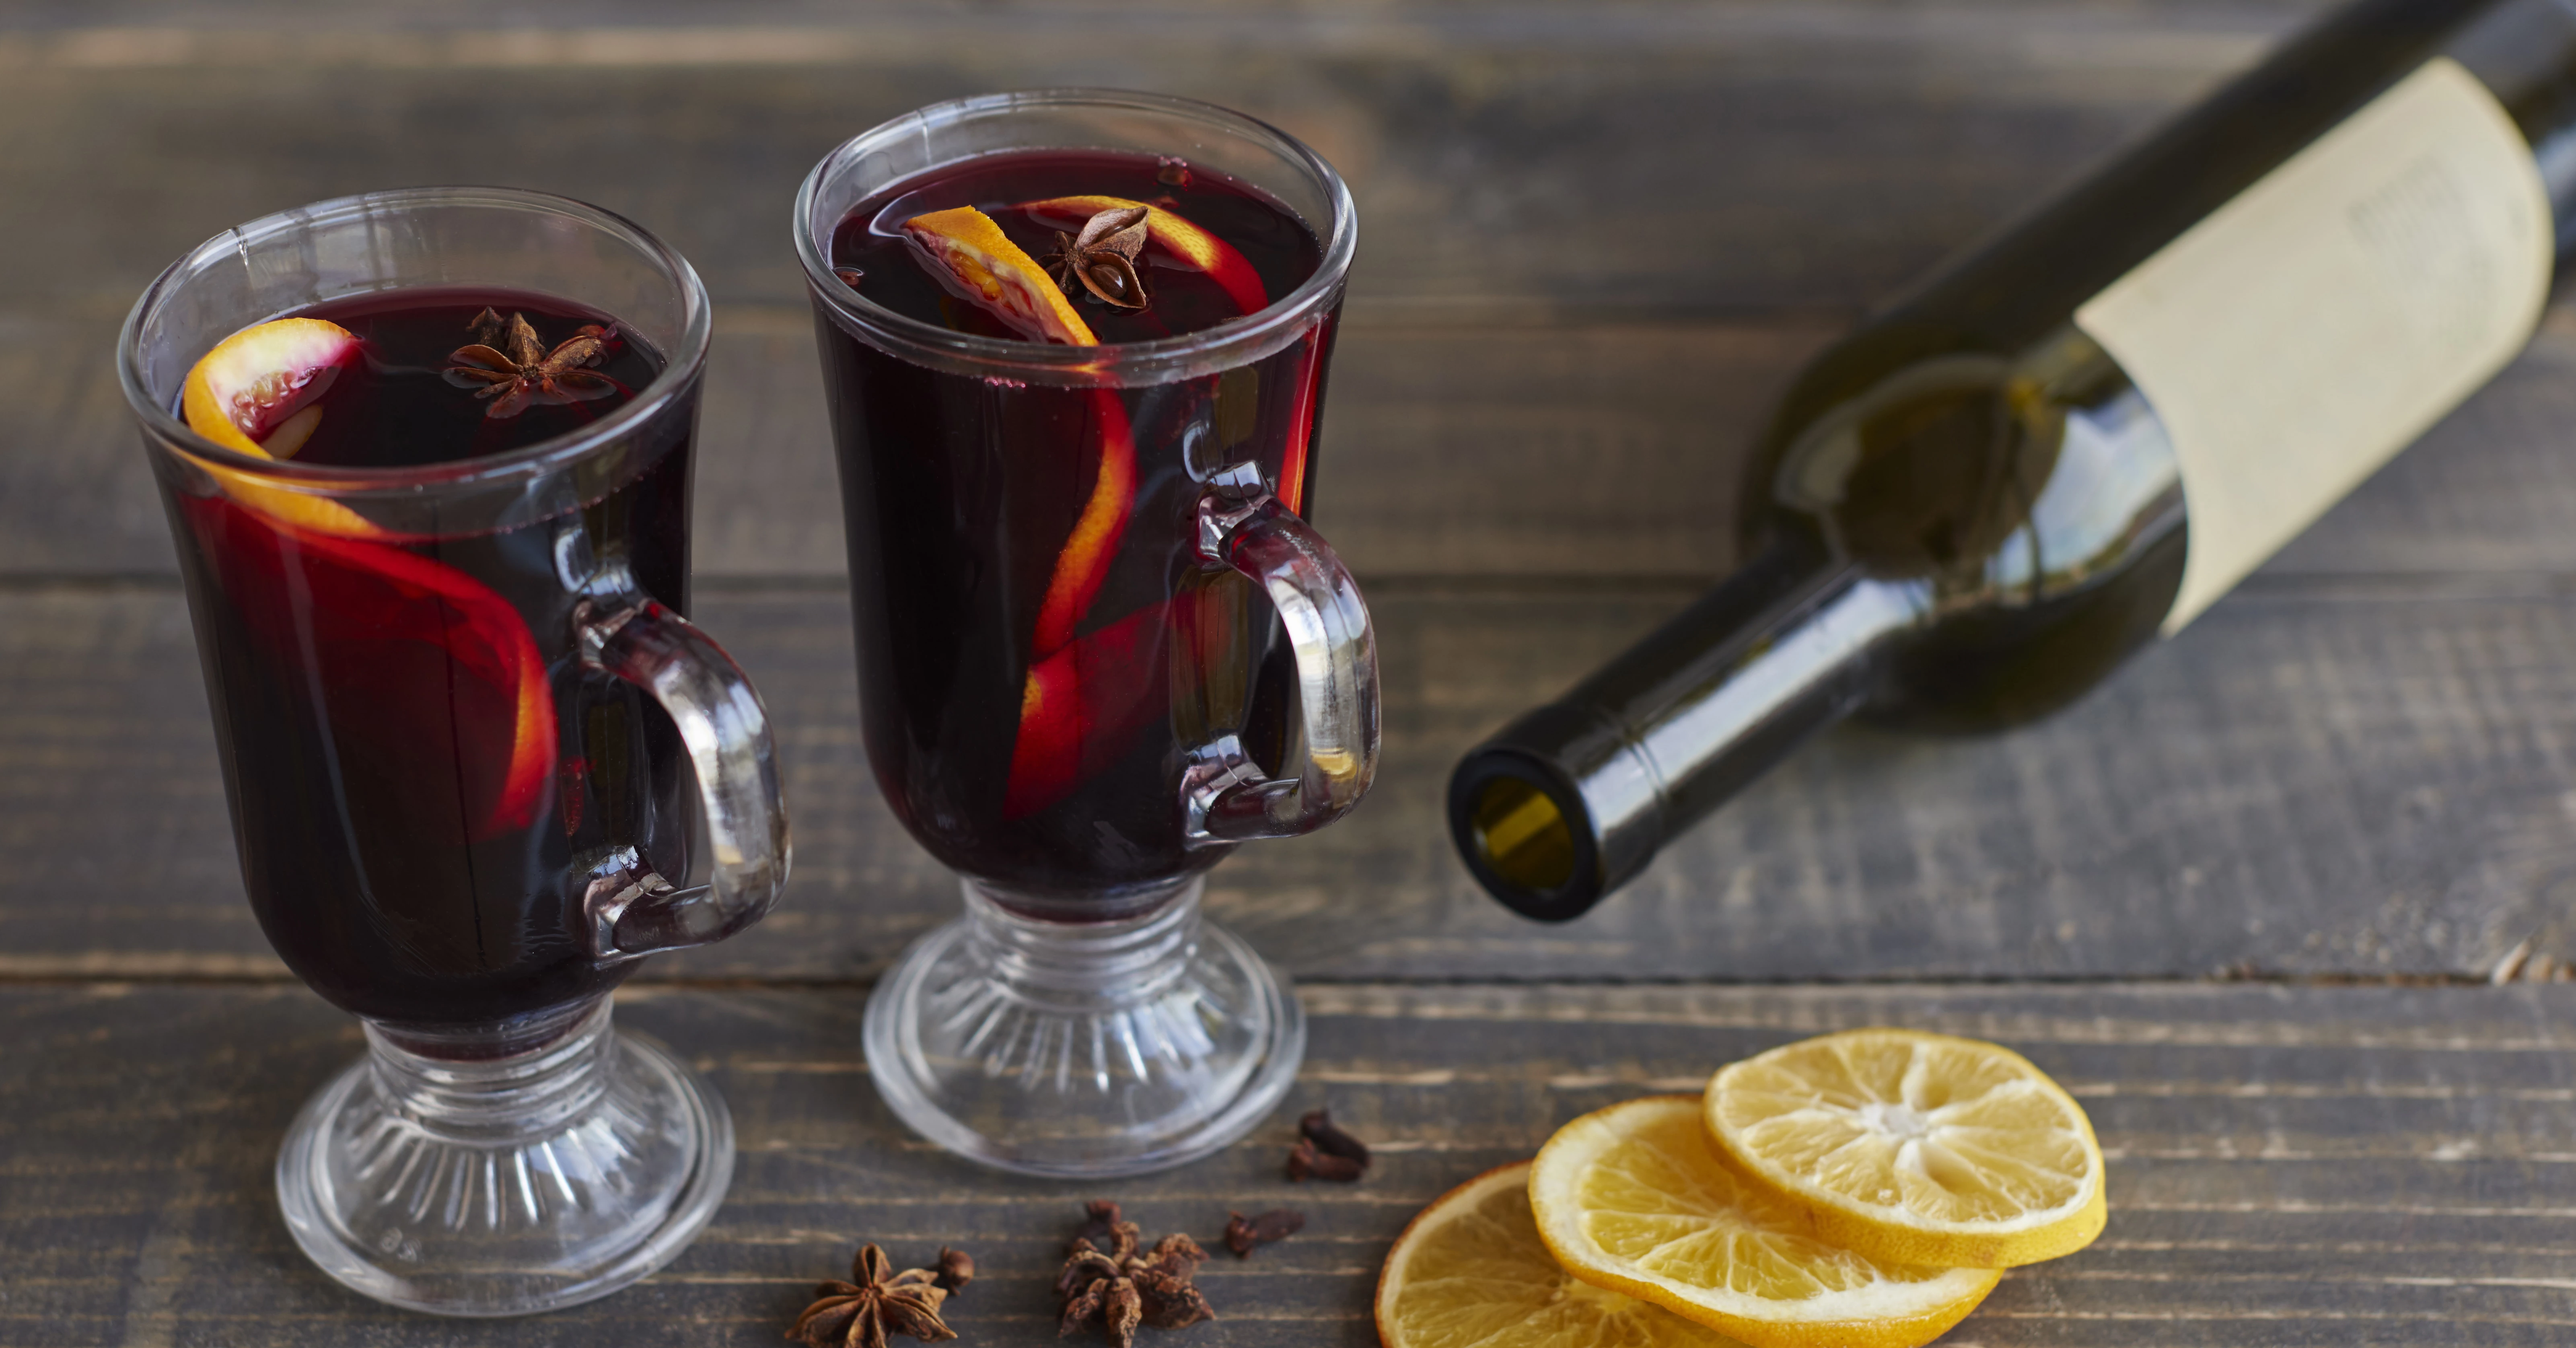 Mulled wine offers benefits beyond just an alcoholic drink